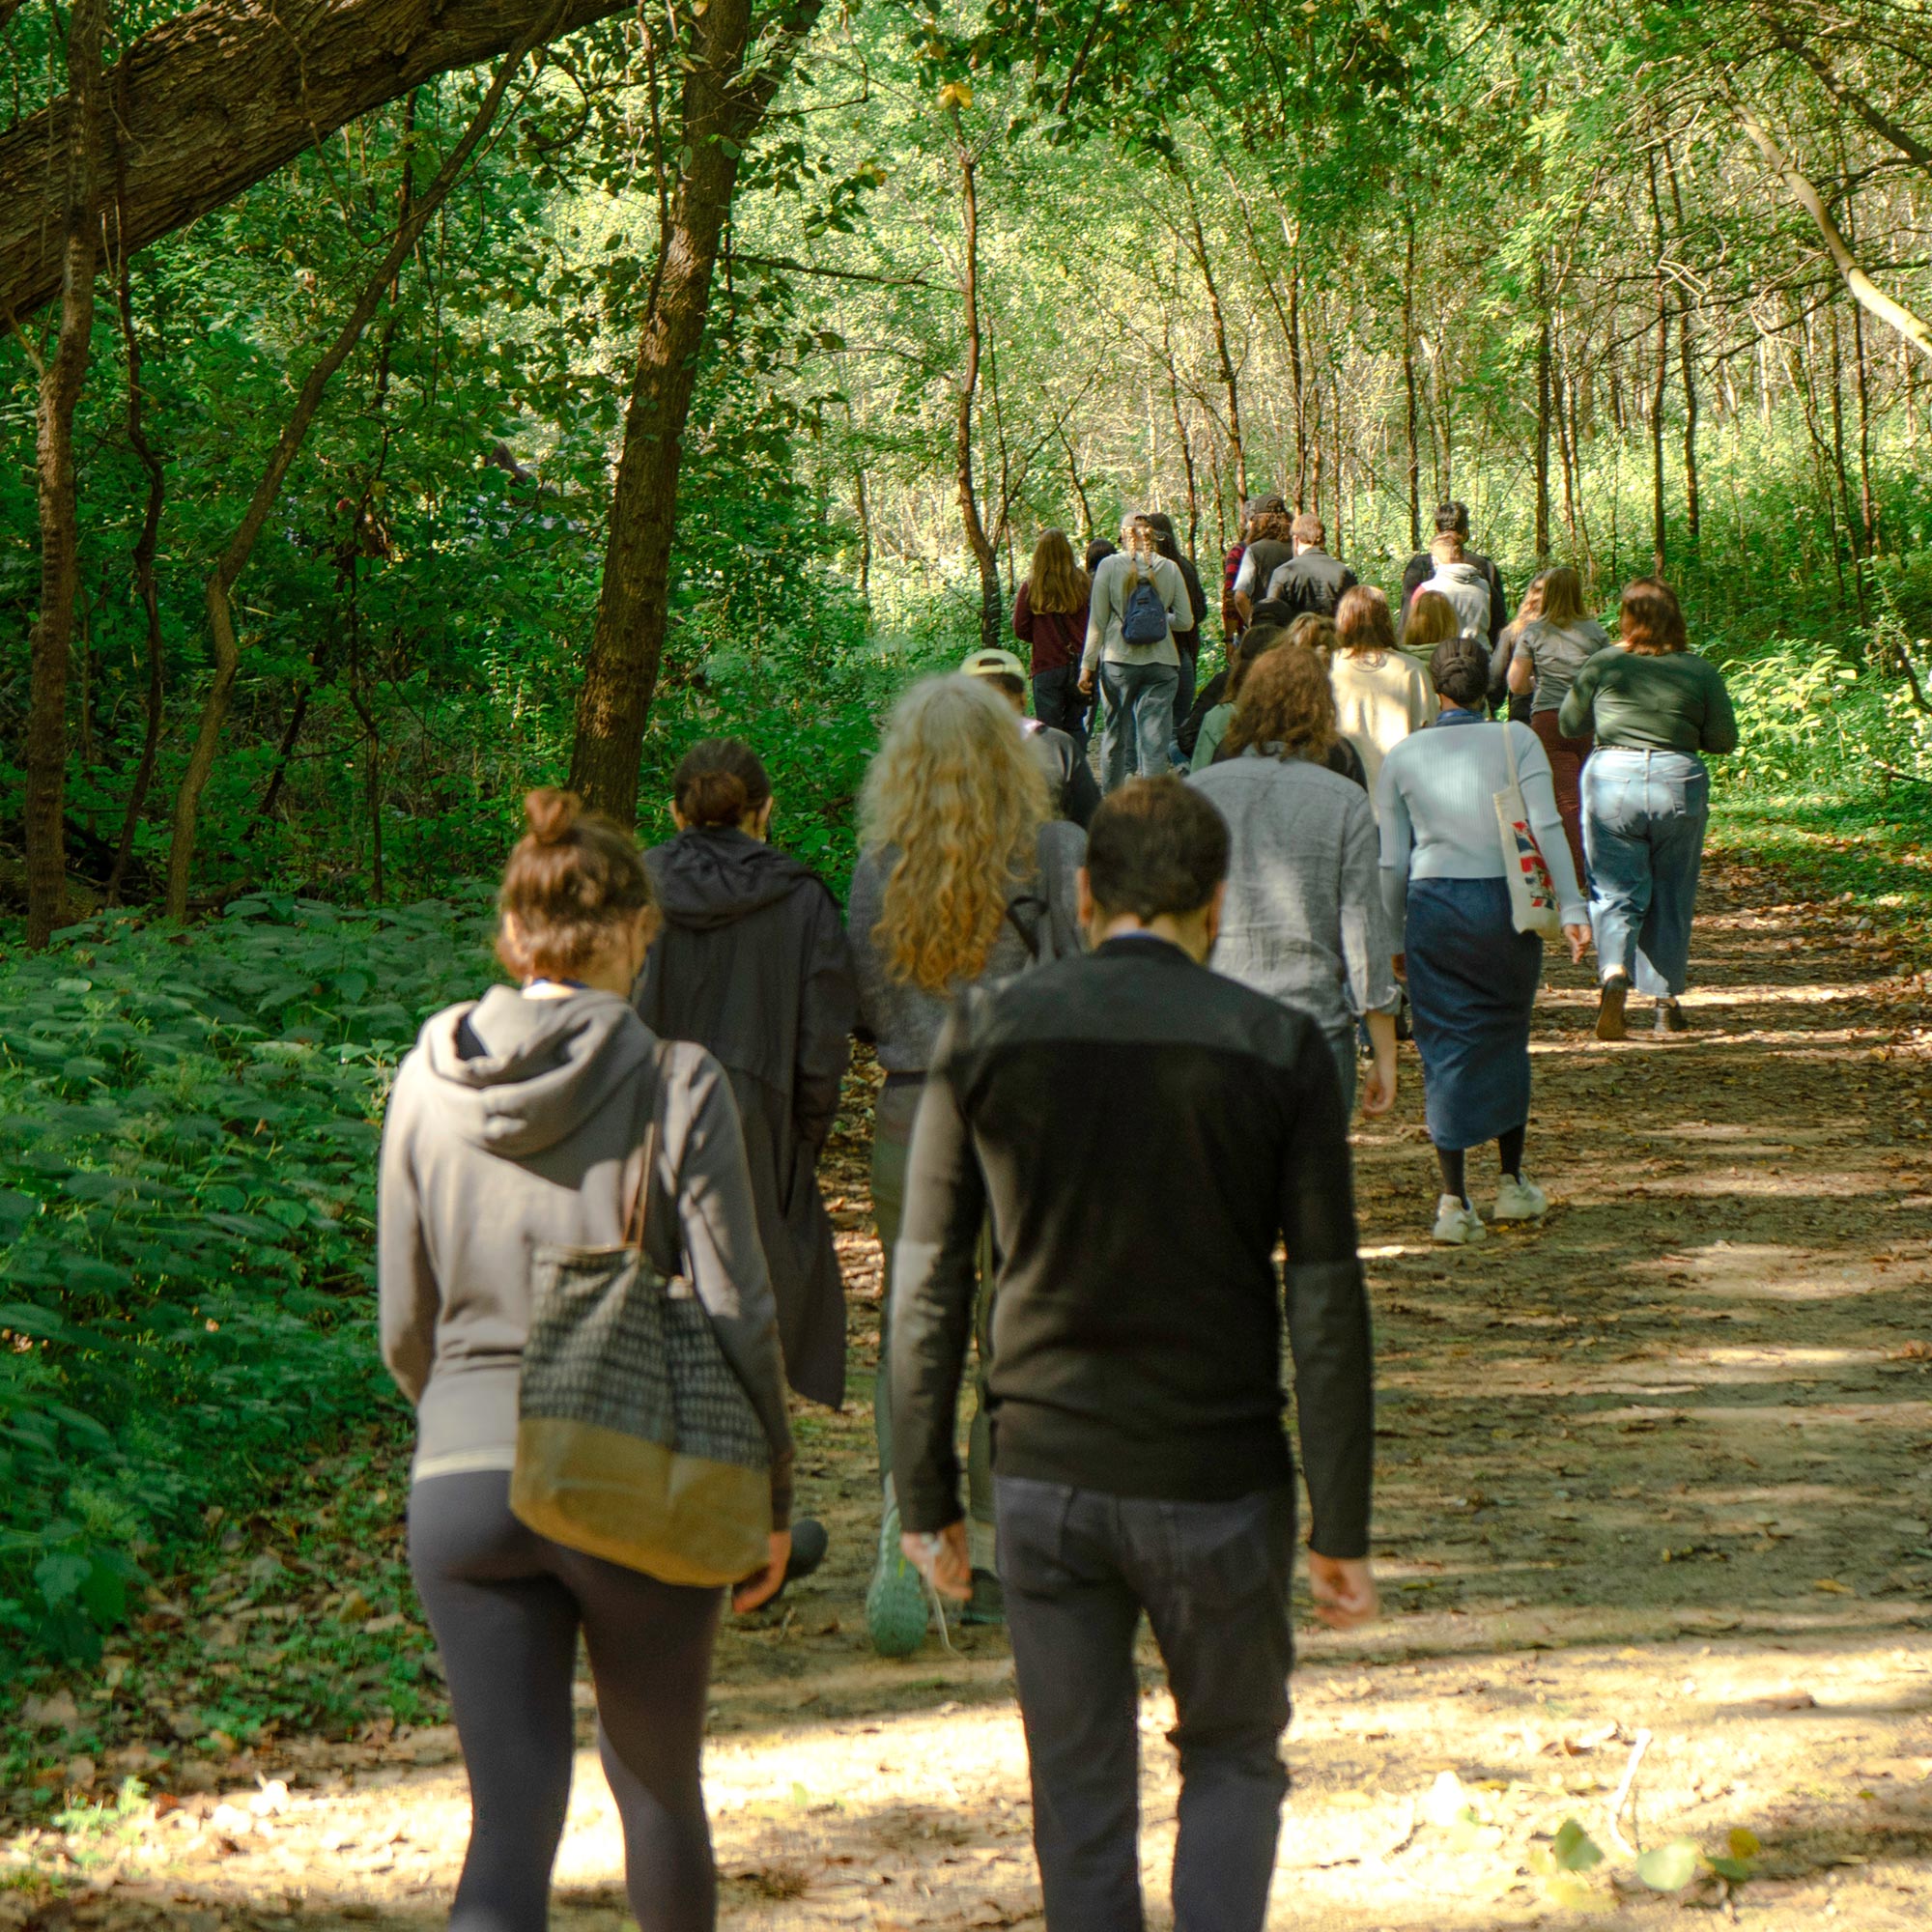 Students walking on a path surrounded by trees